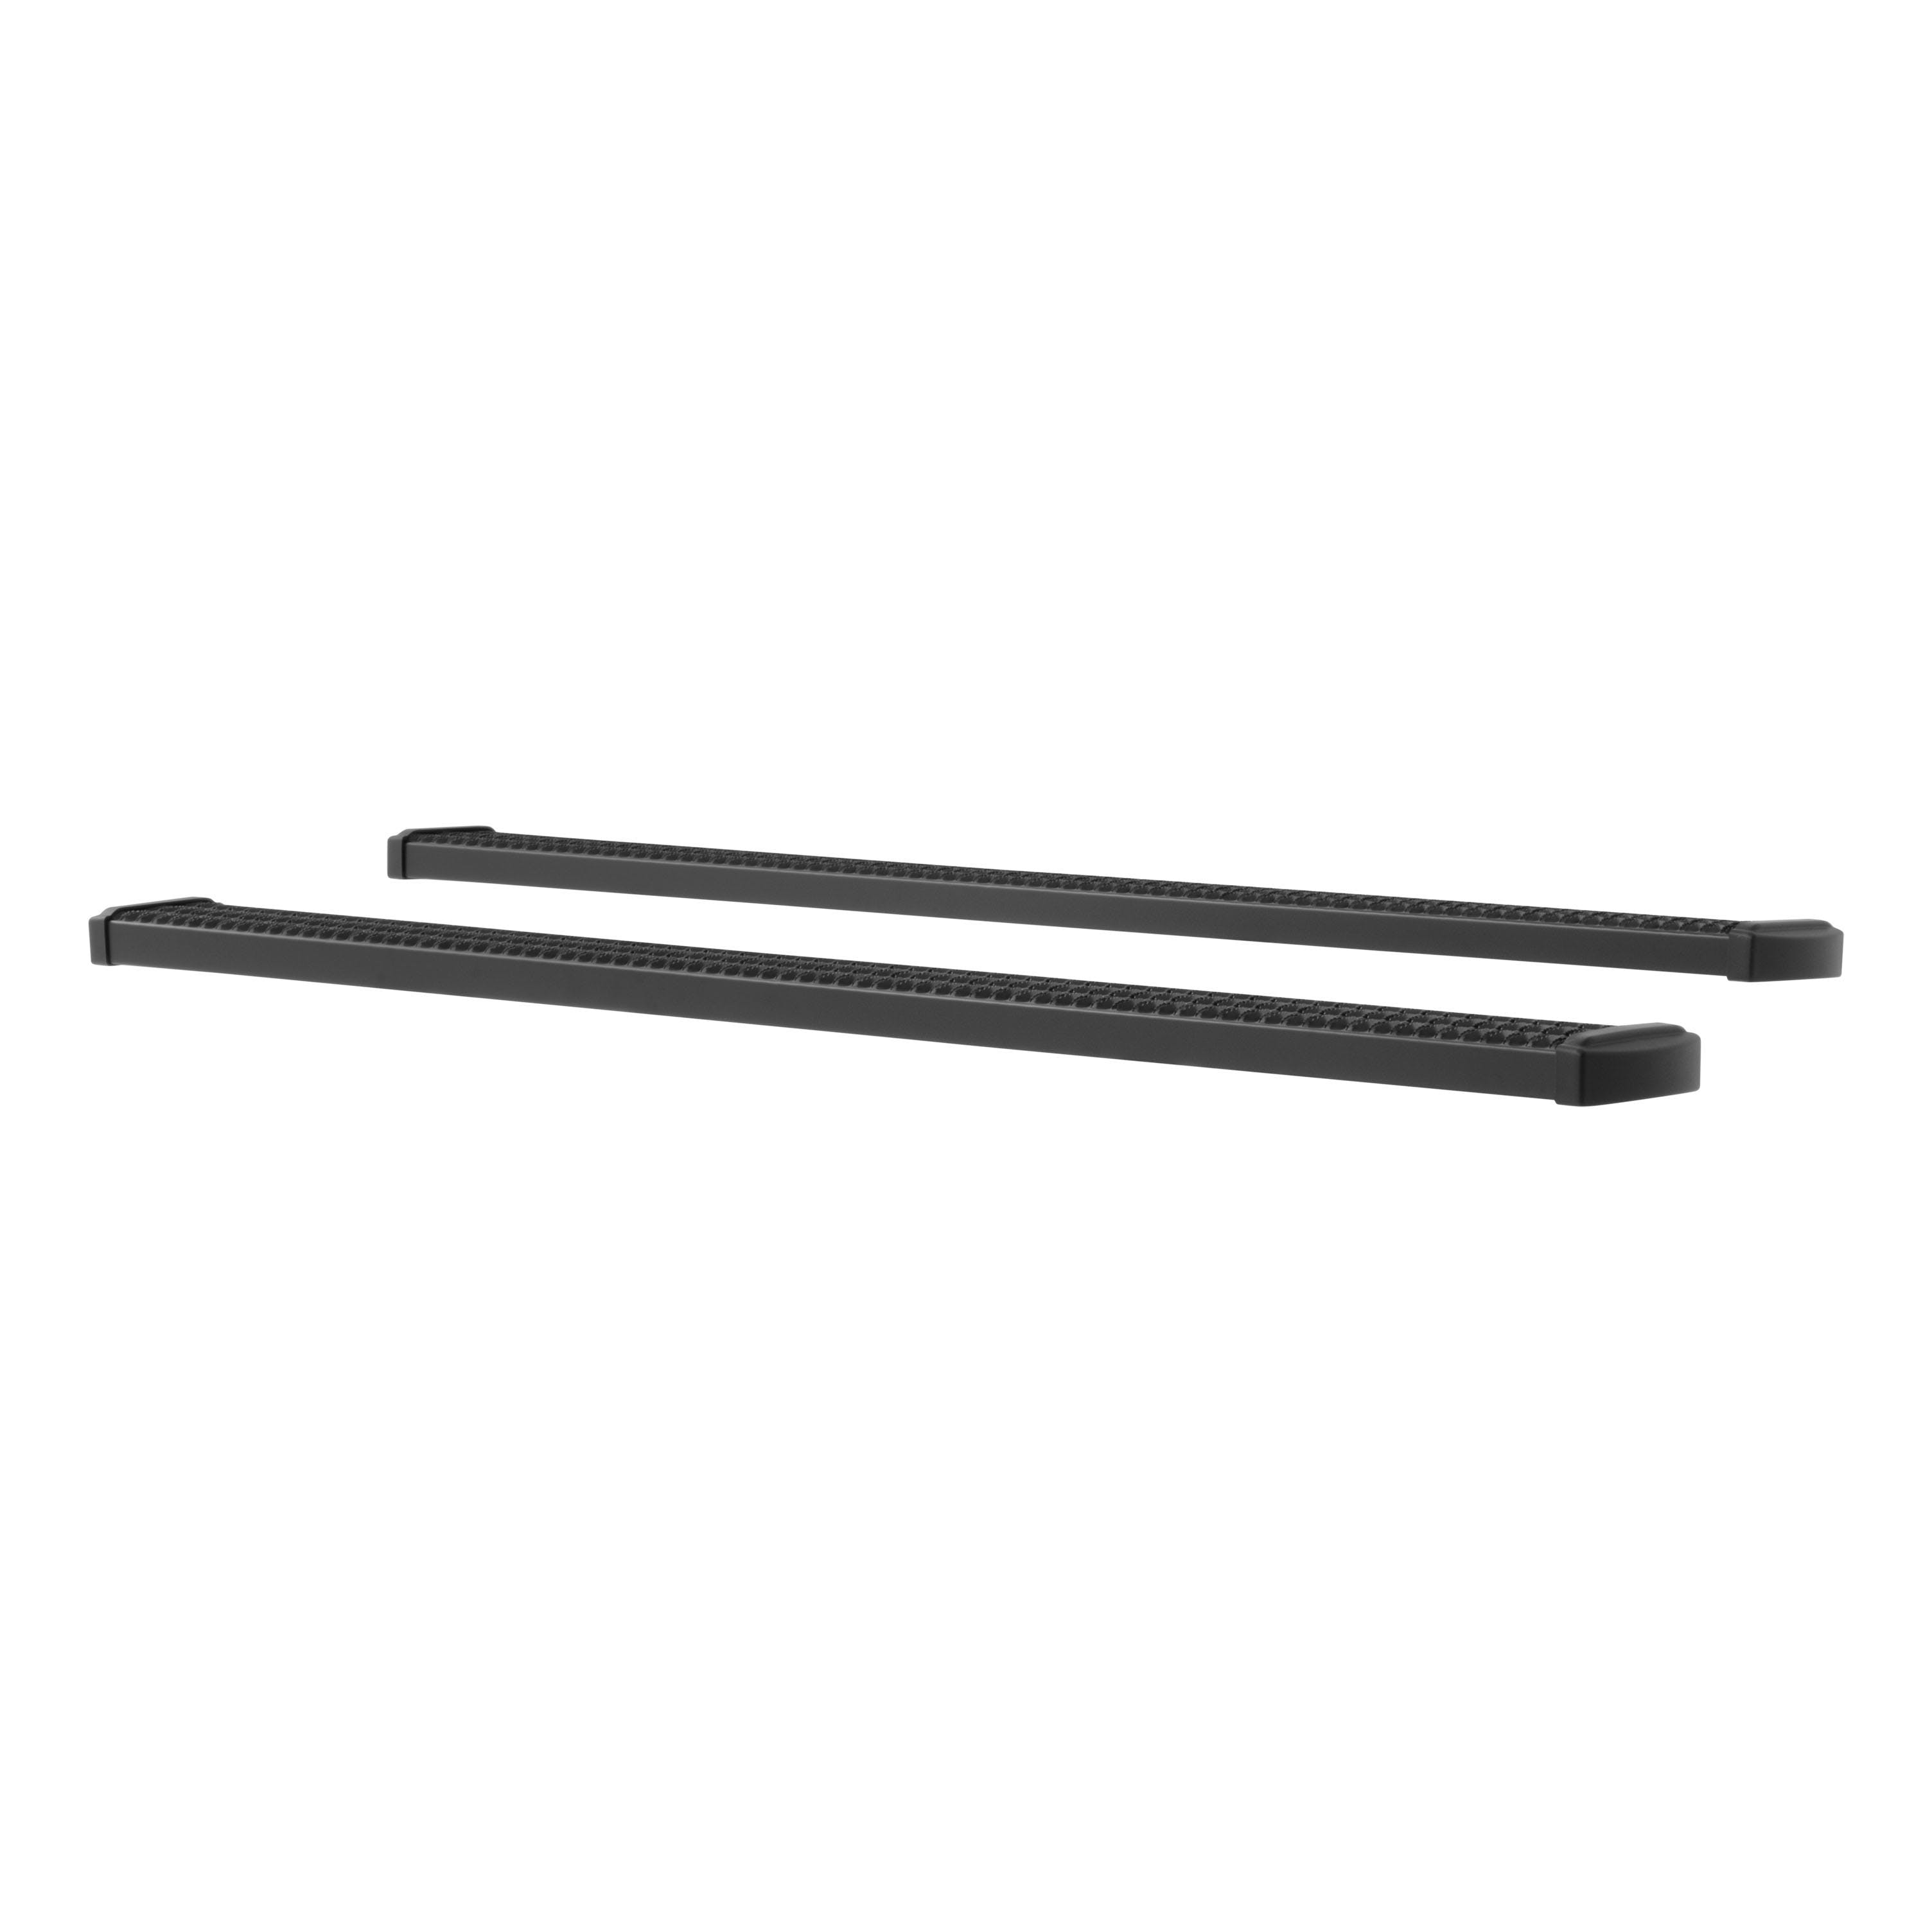 LUVERNE 415088-409922 Grip Step 7 inch Running Boards